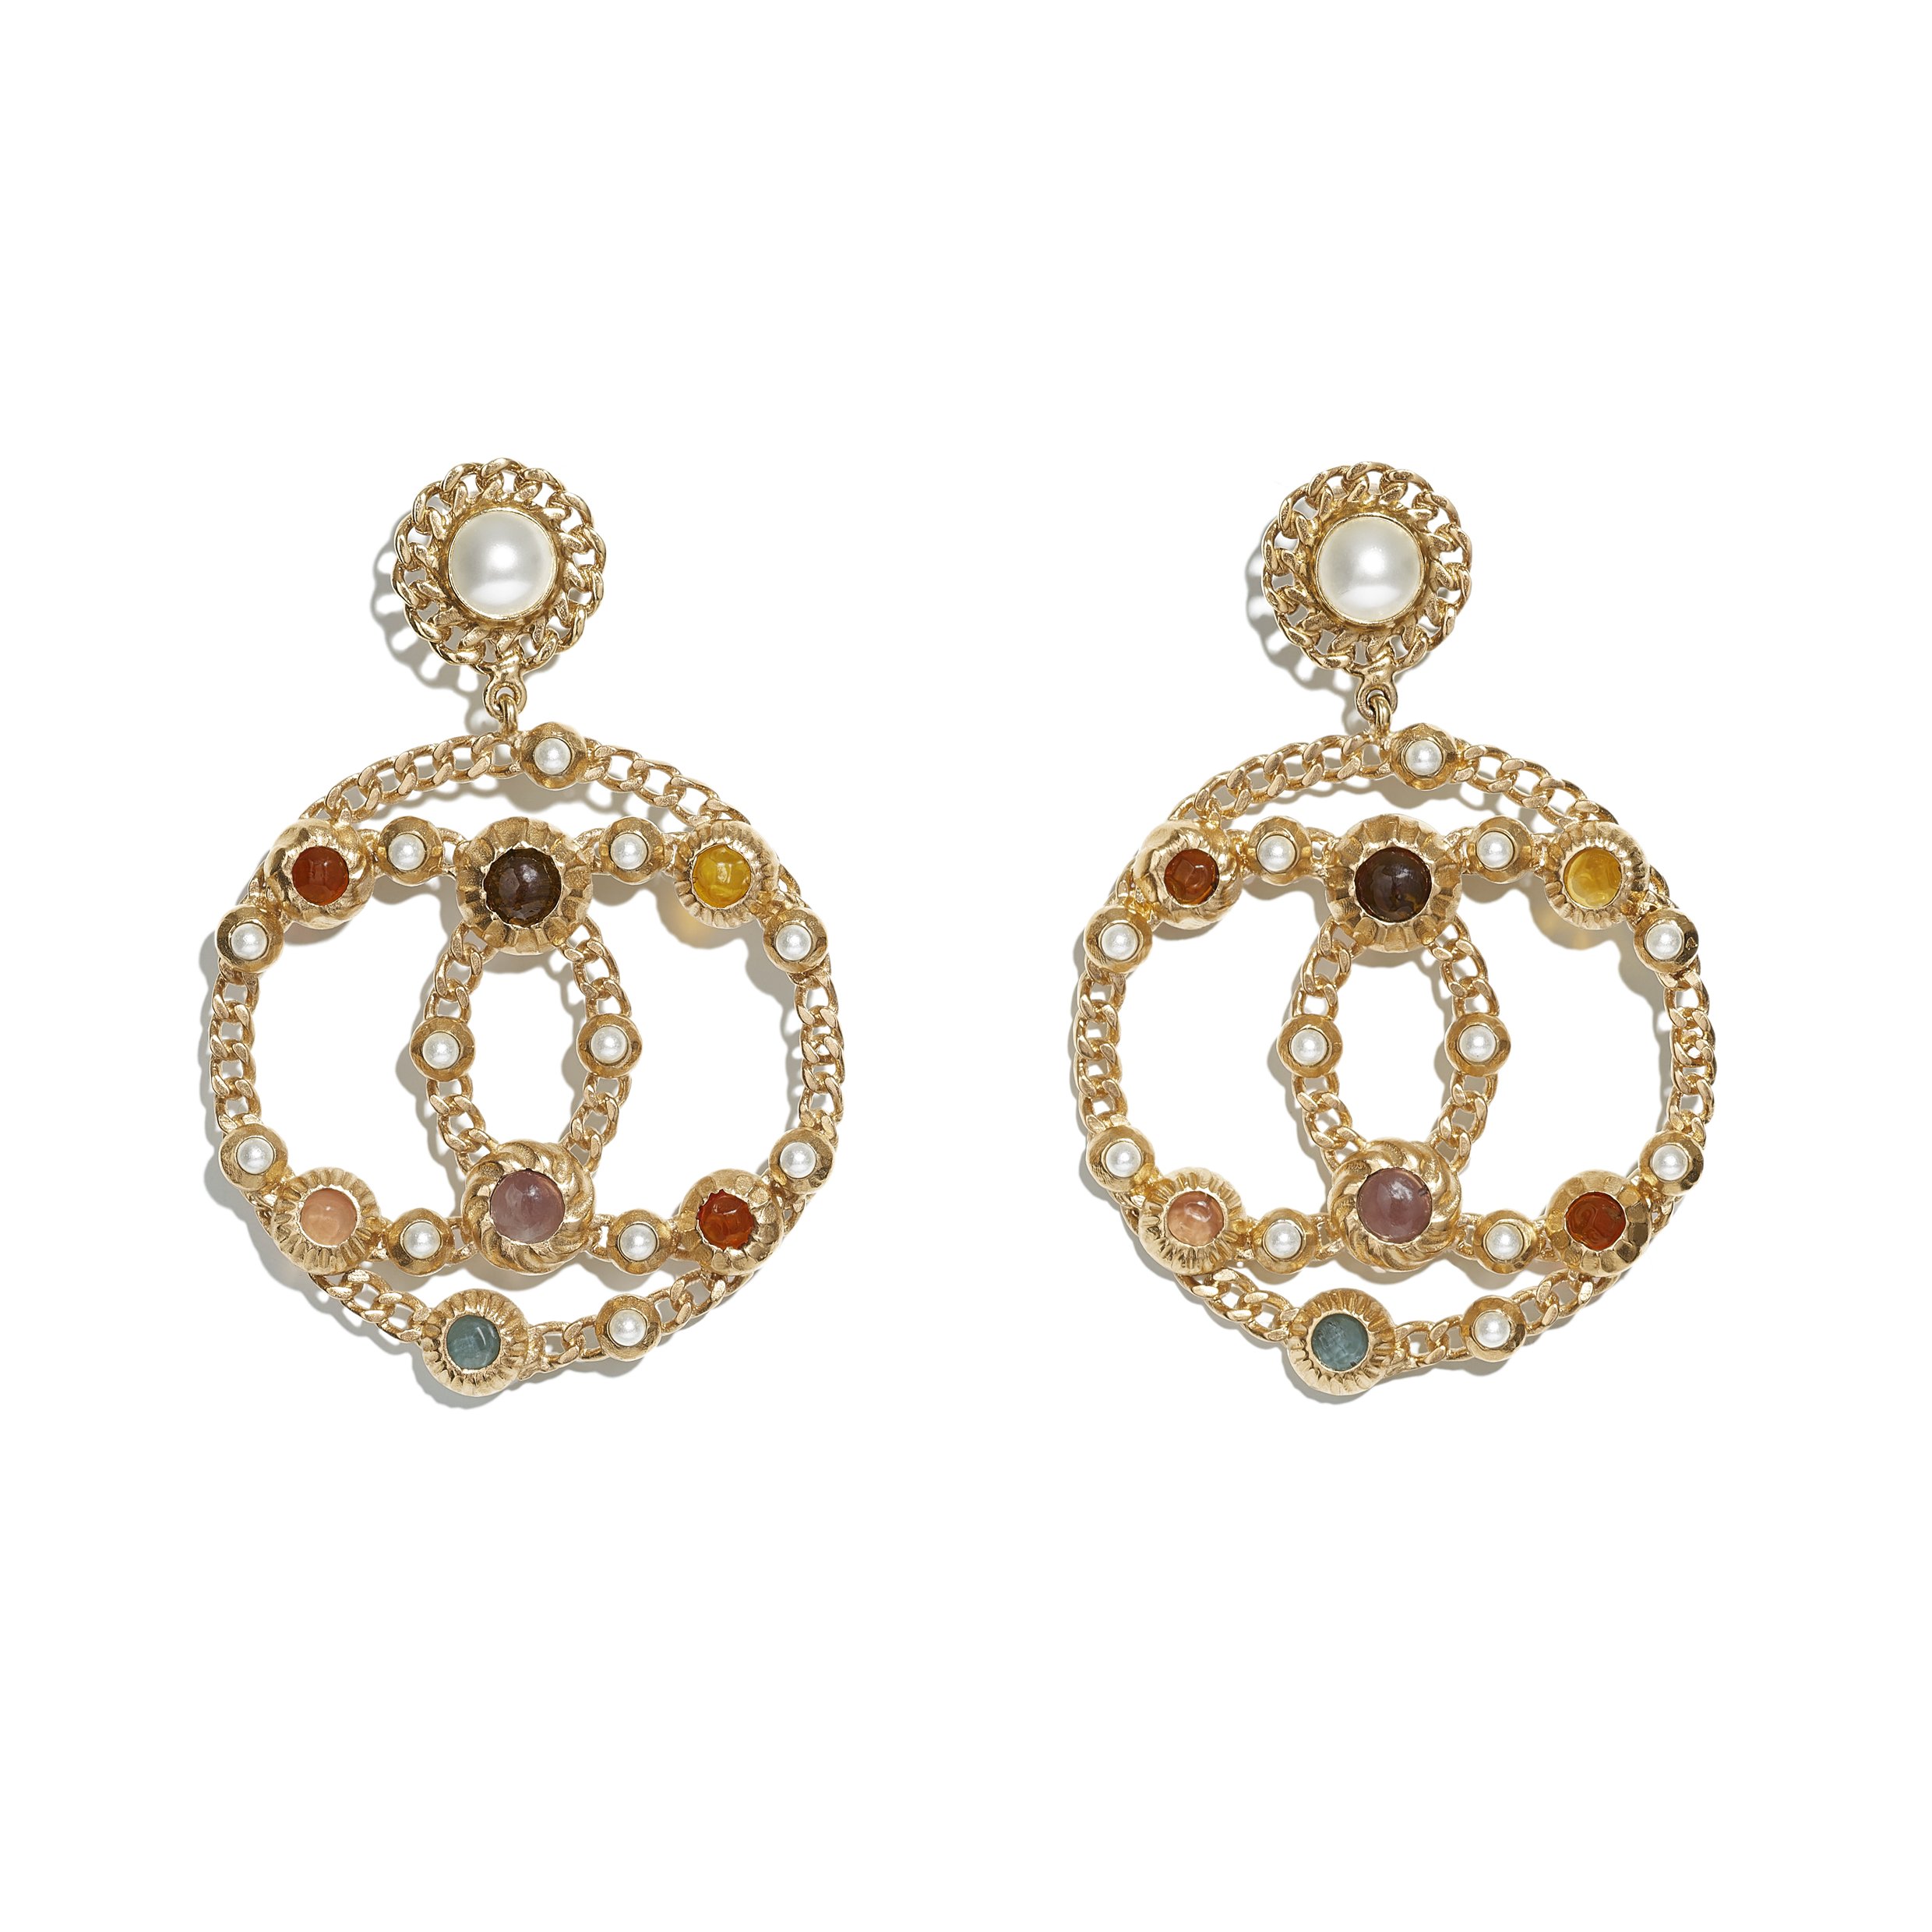 AB0270-Y47391-Z8820 - Earrings in gold metal with glass beads